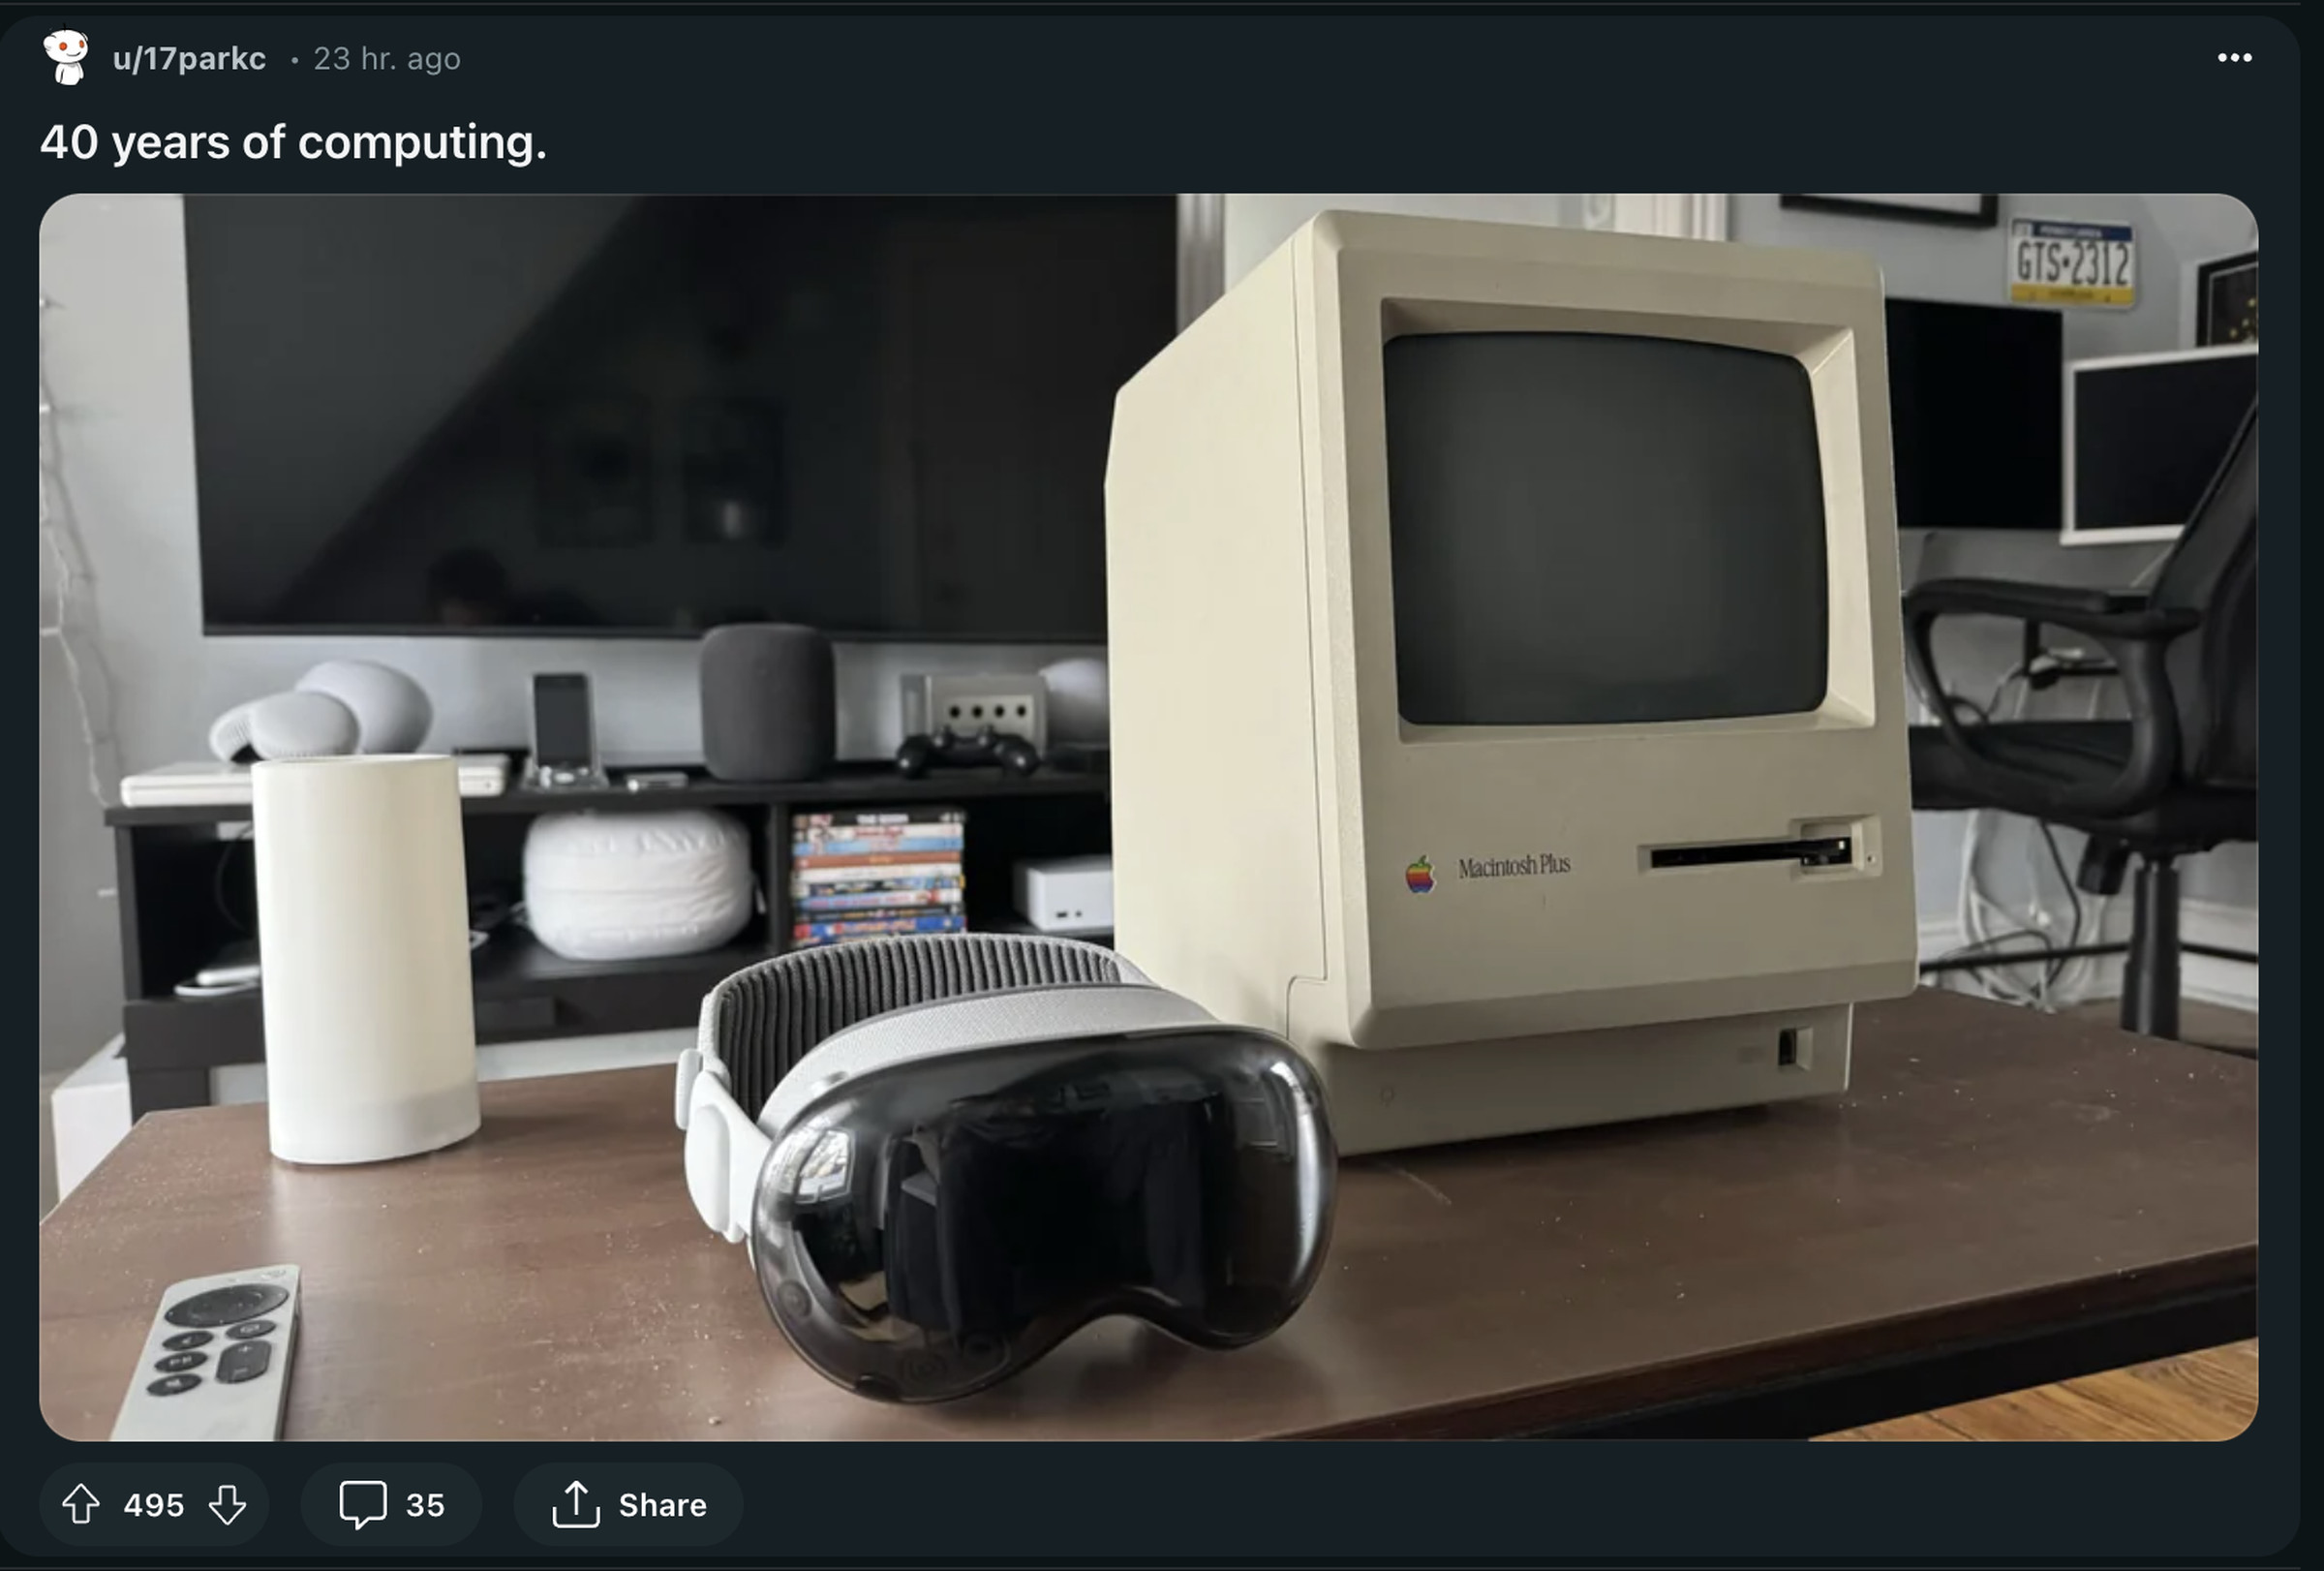 Picture of a Vision Pro next to an original Macintosh.